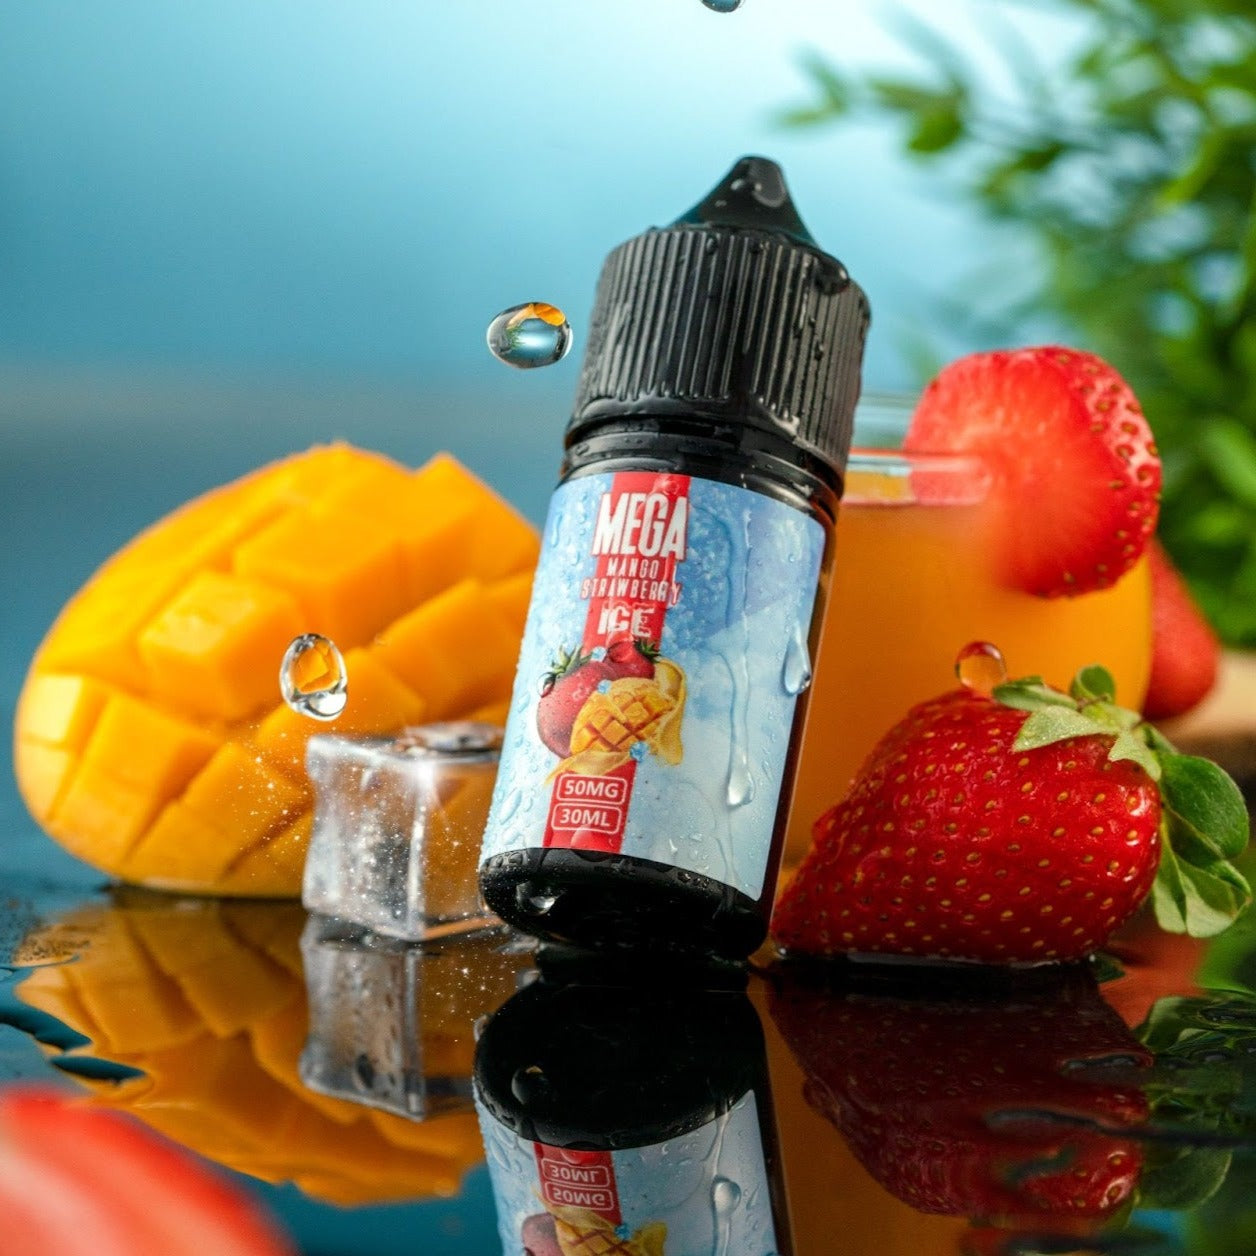 Mega Mango Strawberry Ice by GRAND - A tropical blend of mango, strawberry, and ice in Saltnic e-liquid form, perfect for a refreshing vaping experience in UAE